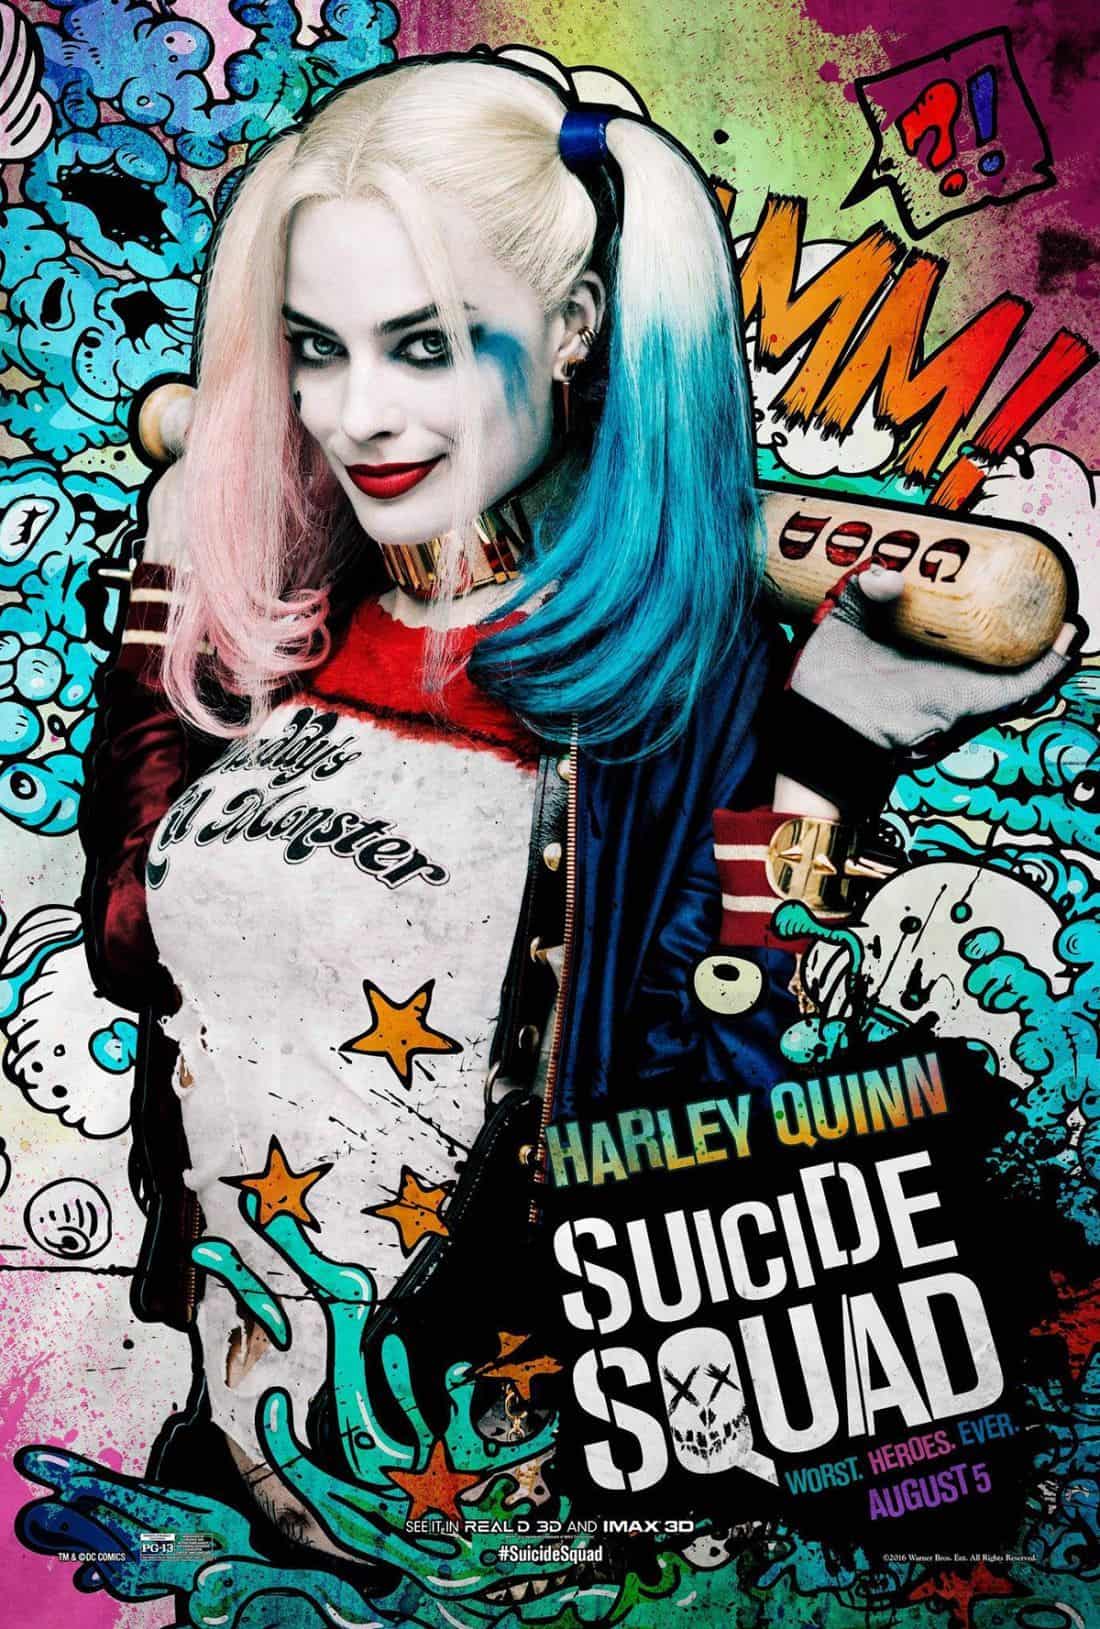 Margot Robbie as Harley Quinn in Suicide Squad movie poster